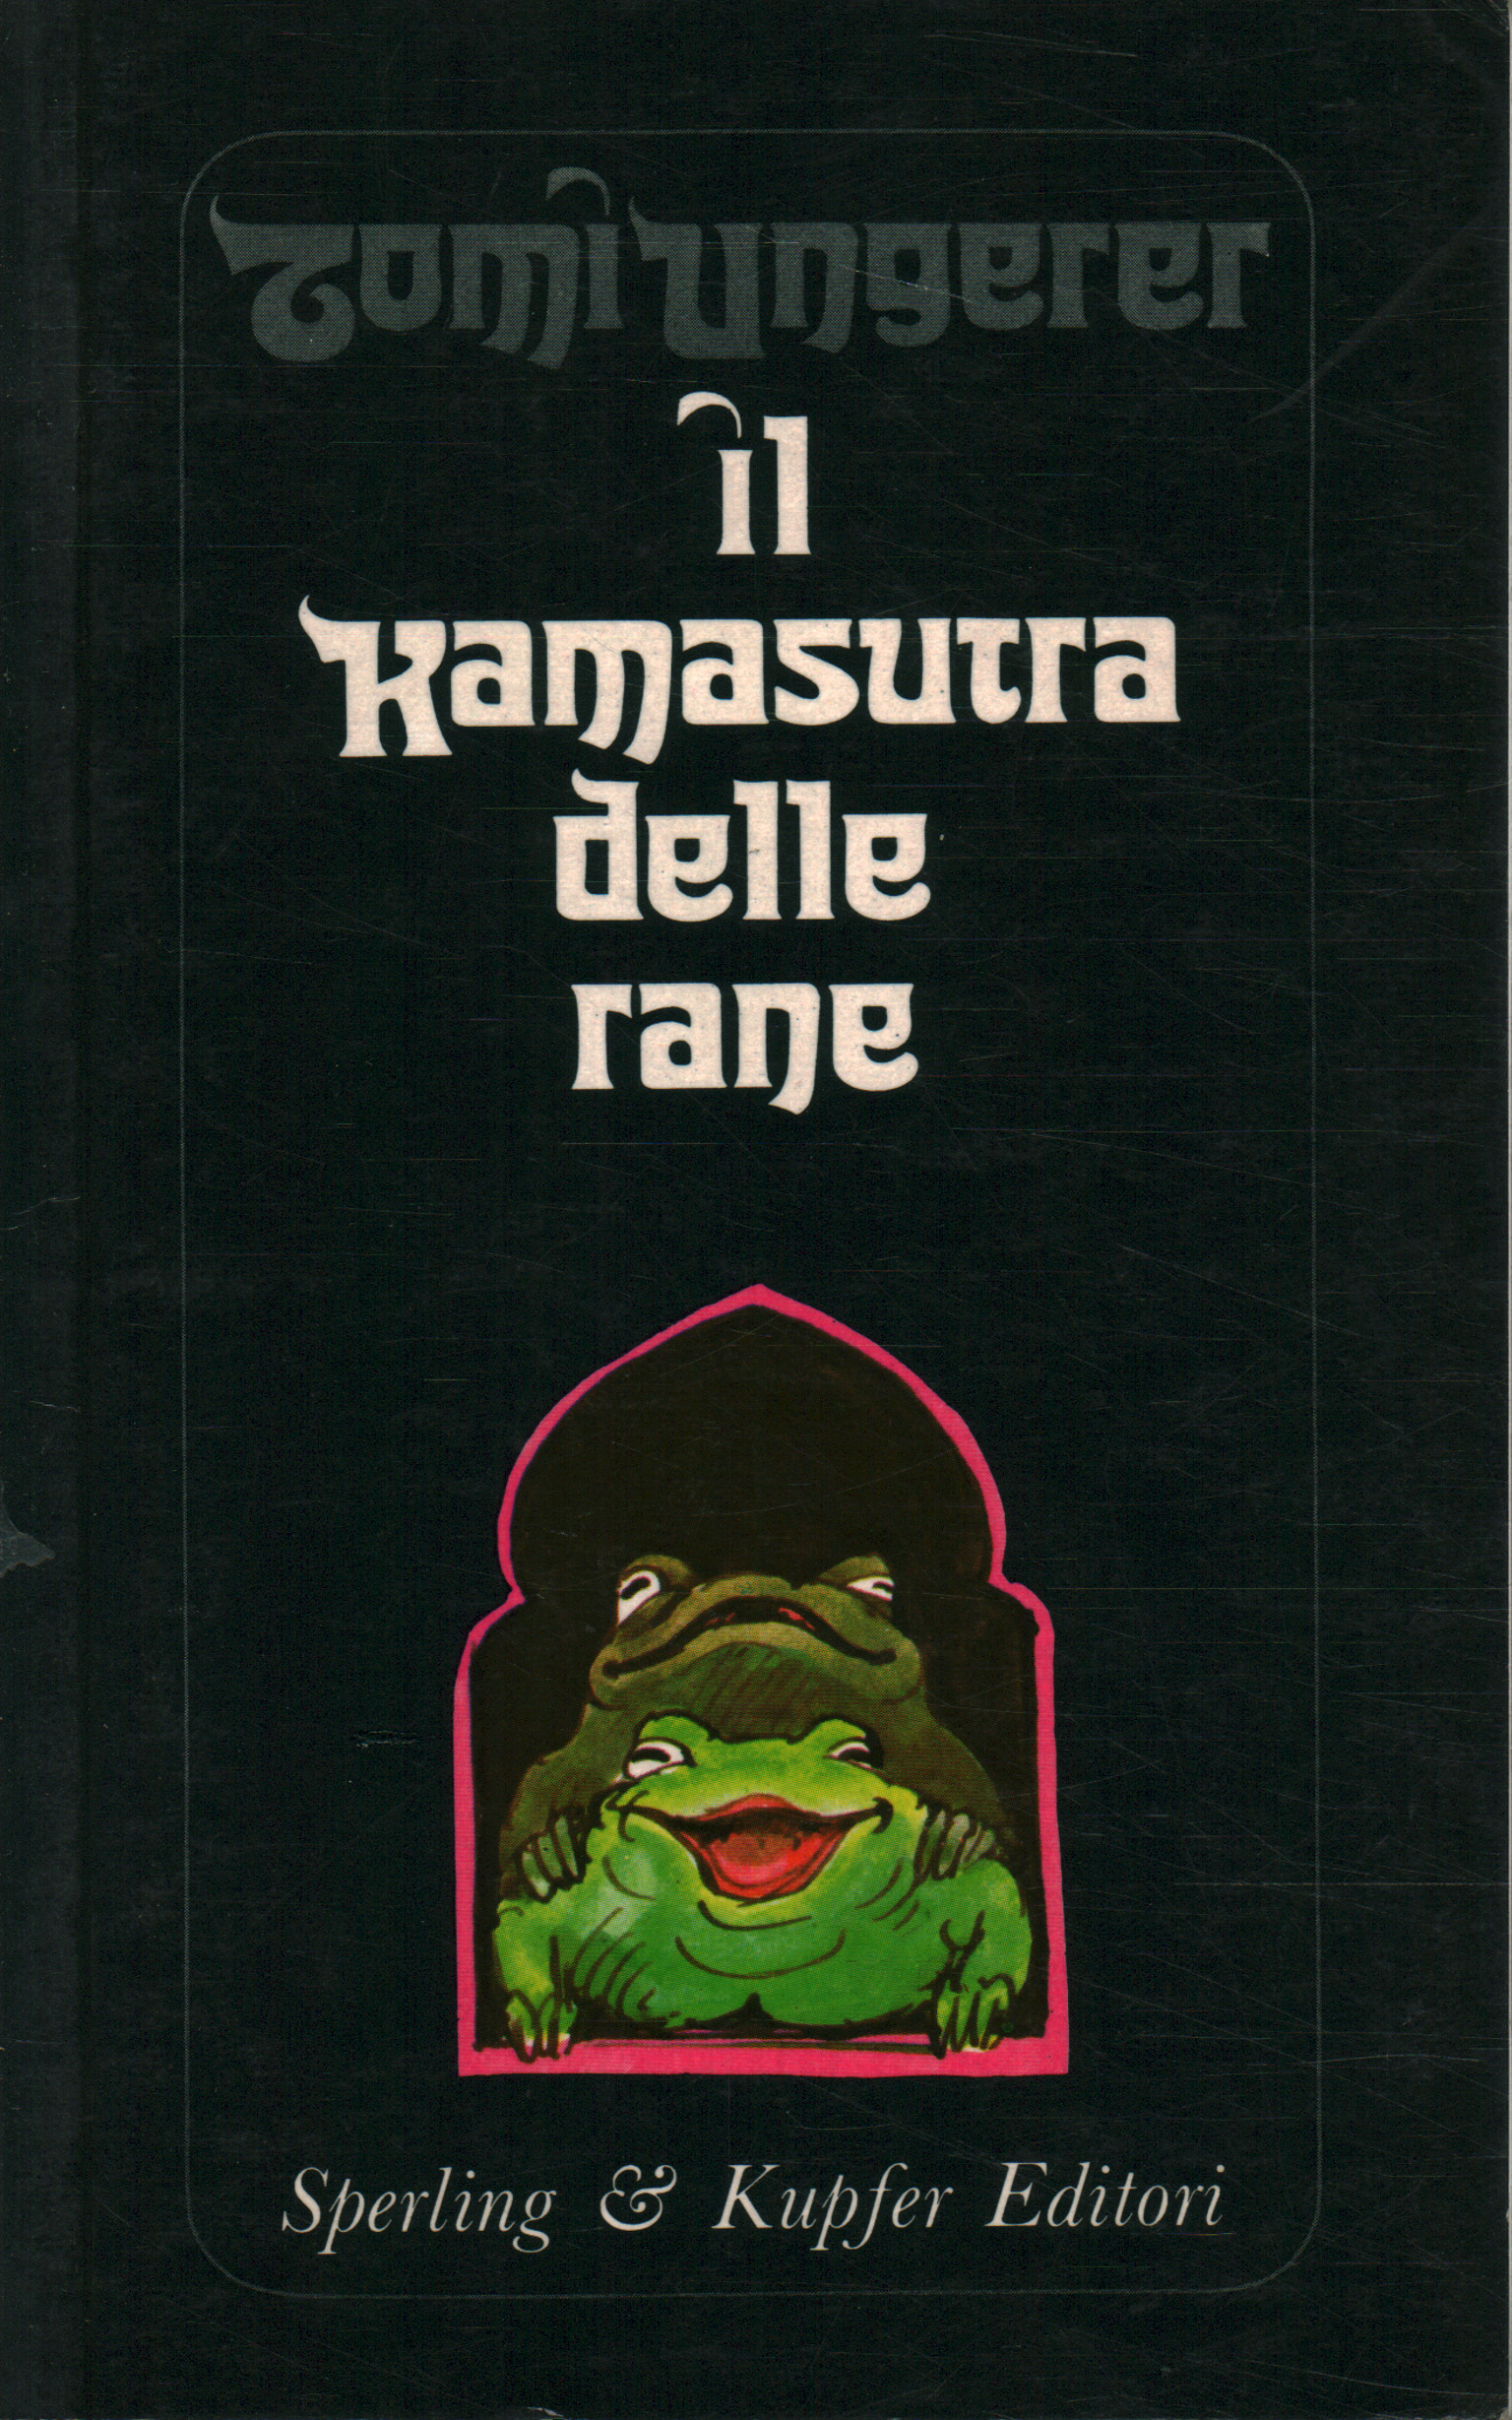 The Kamasutra of frogs